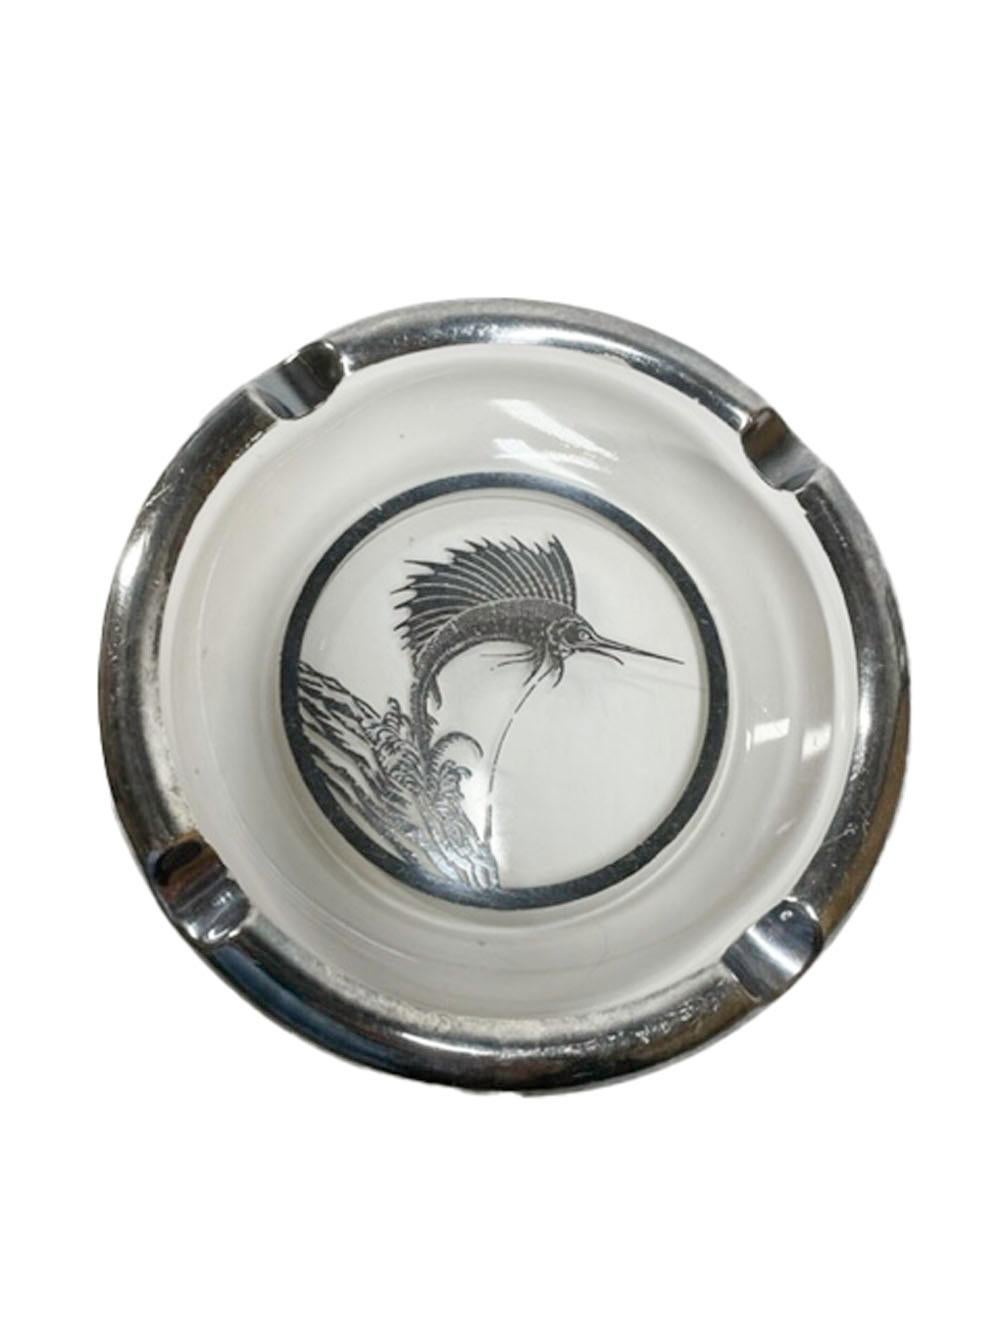 American Art Deco, Rockwell Silver Overlay Clear Glass Ashtray with Marlin/Sailfish Motif For Sale